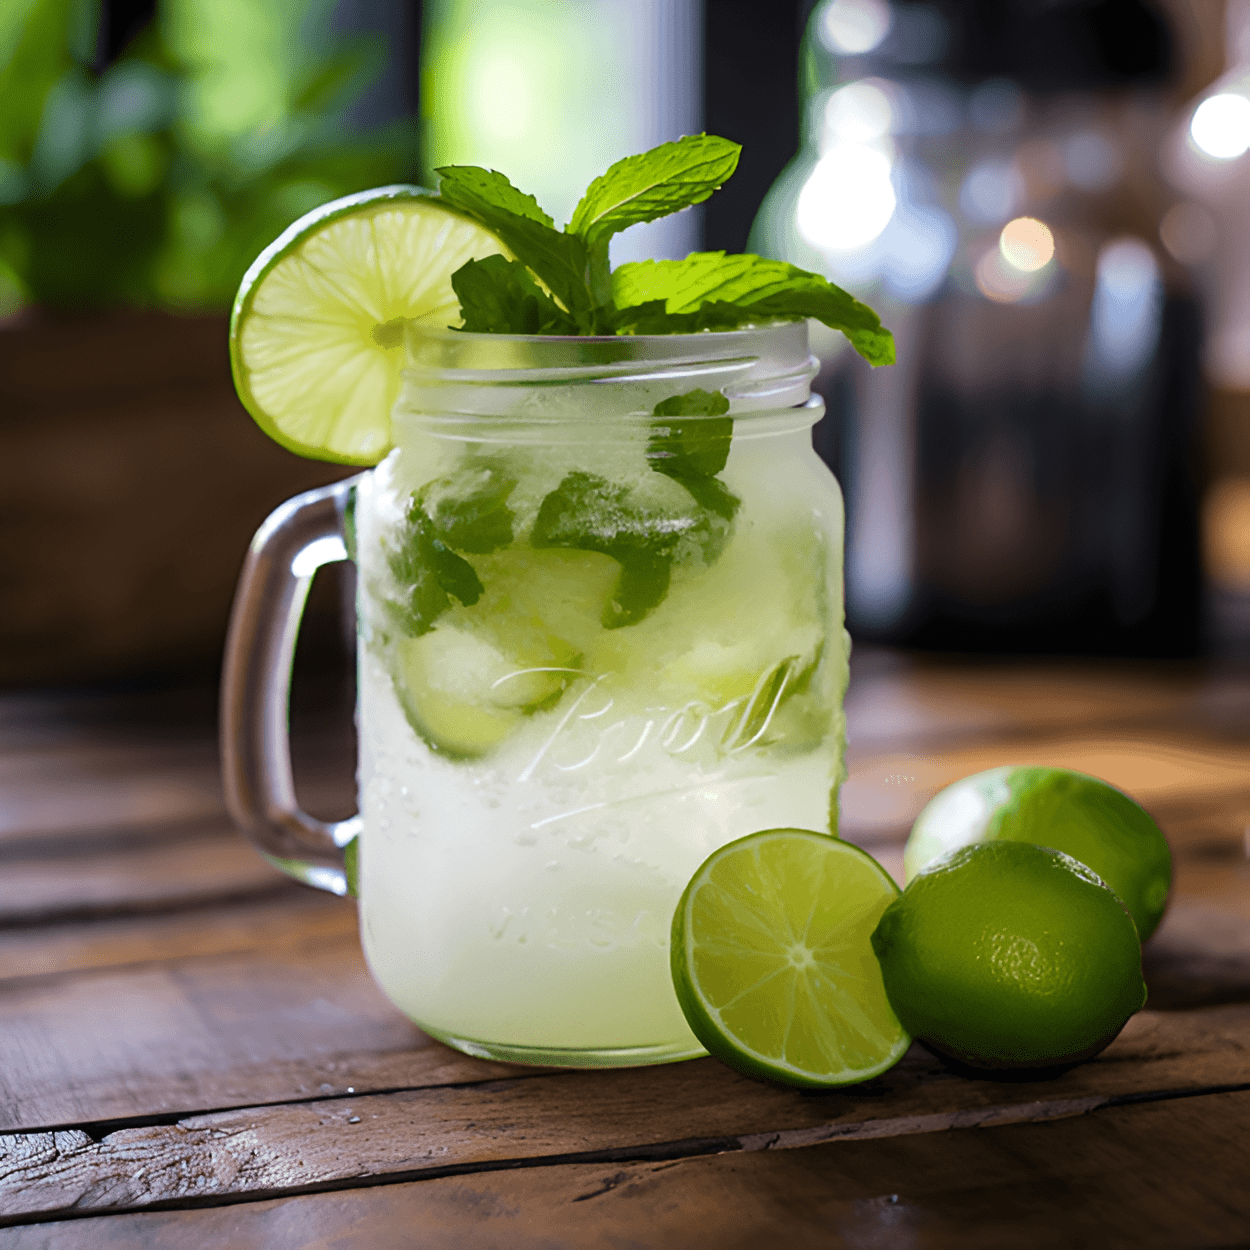 Mason Jar Mojito Cocktail Recipe - This cocktail has a refreshing, minty taste with a hint of sweetness from the sugar. The rum adds a smooth, rich flavor that balances out the tartness of the lime. It's a light, easy-to-drink cocktail that's perfect for hot summer days.